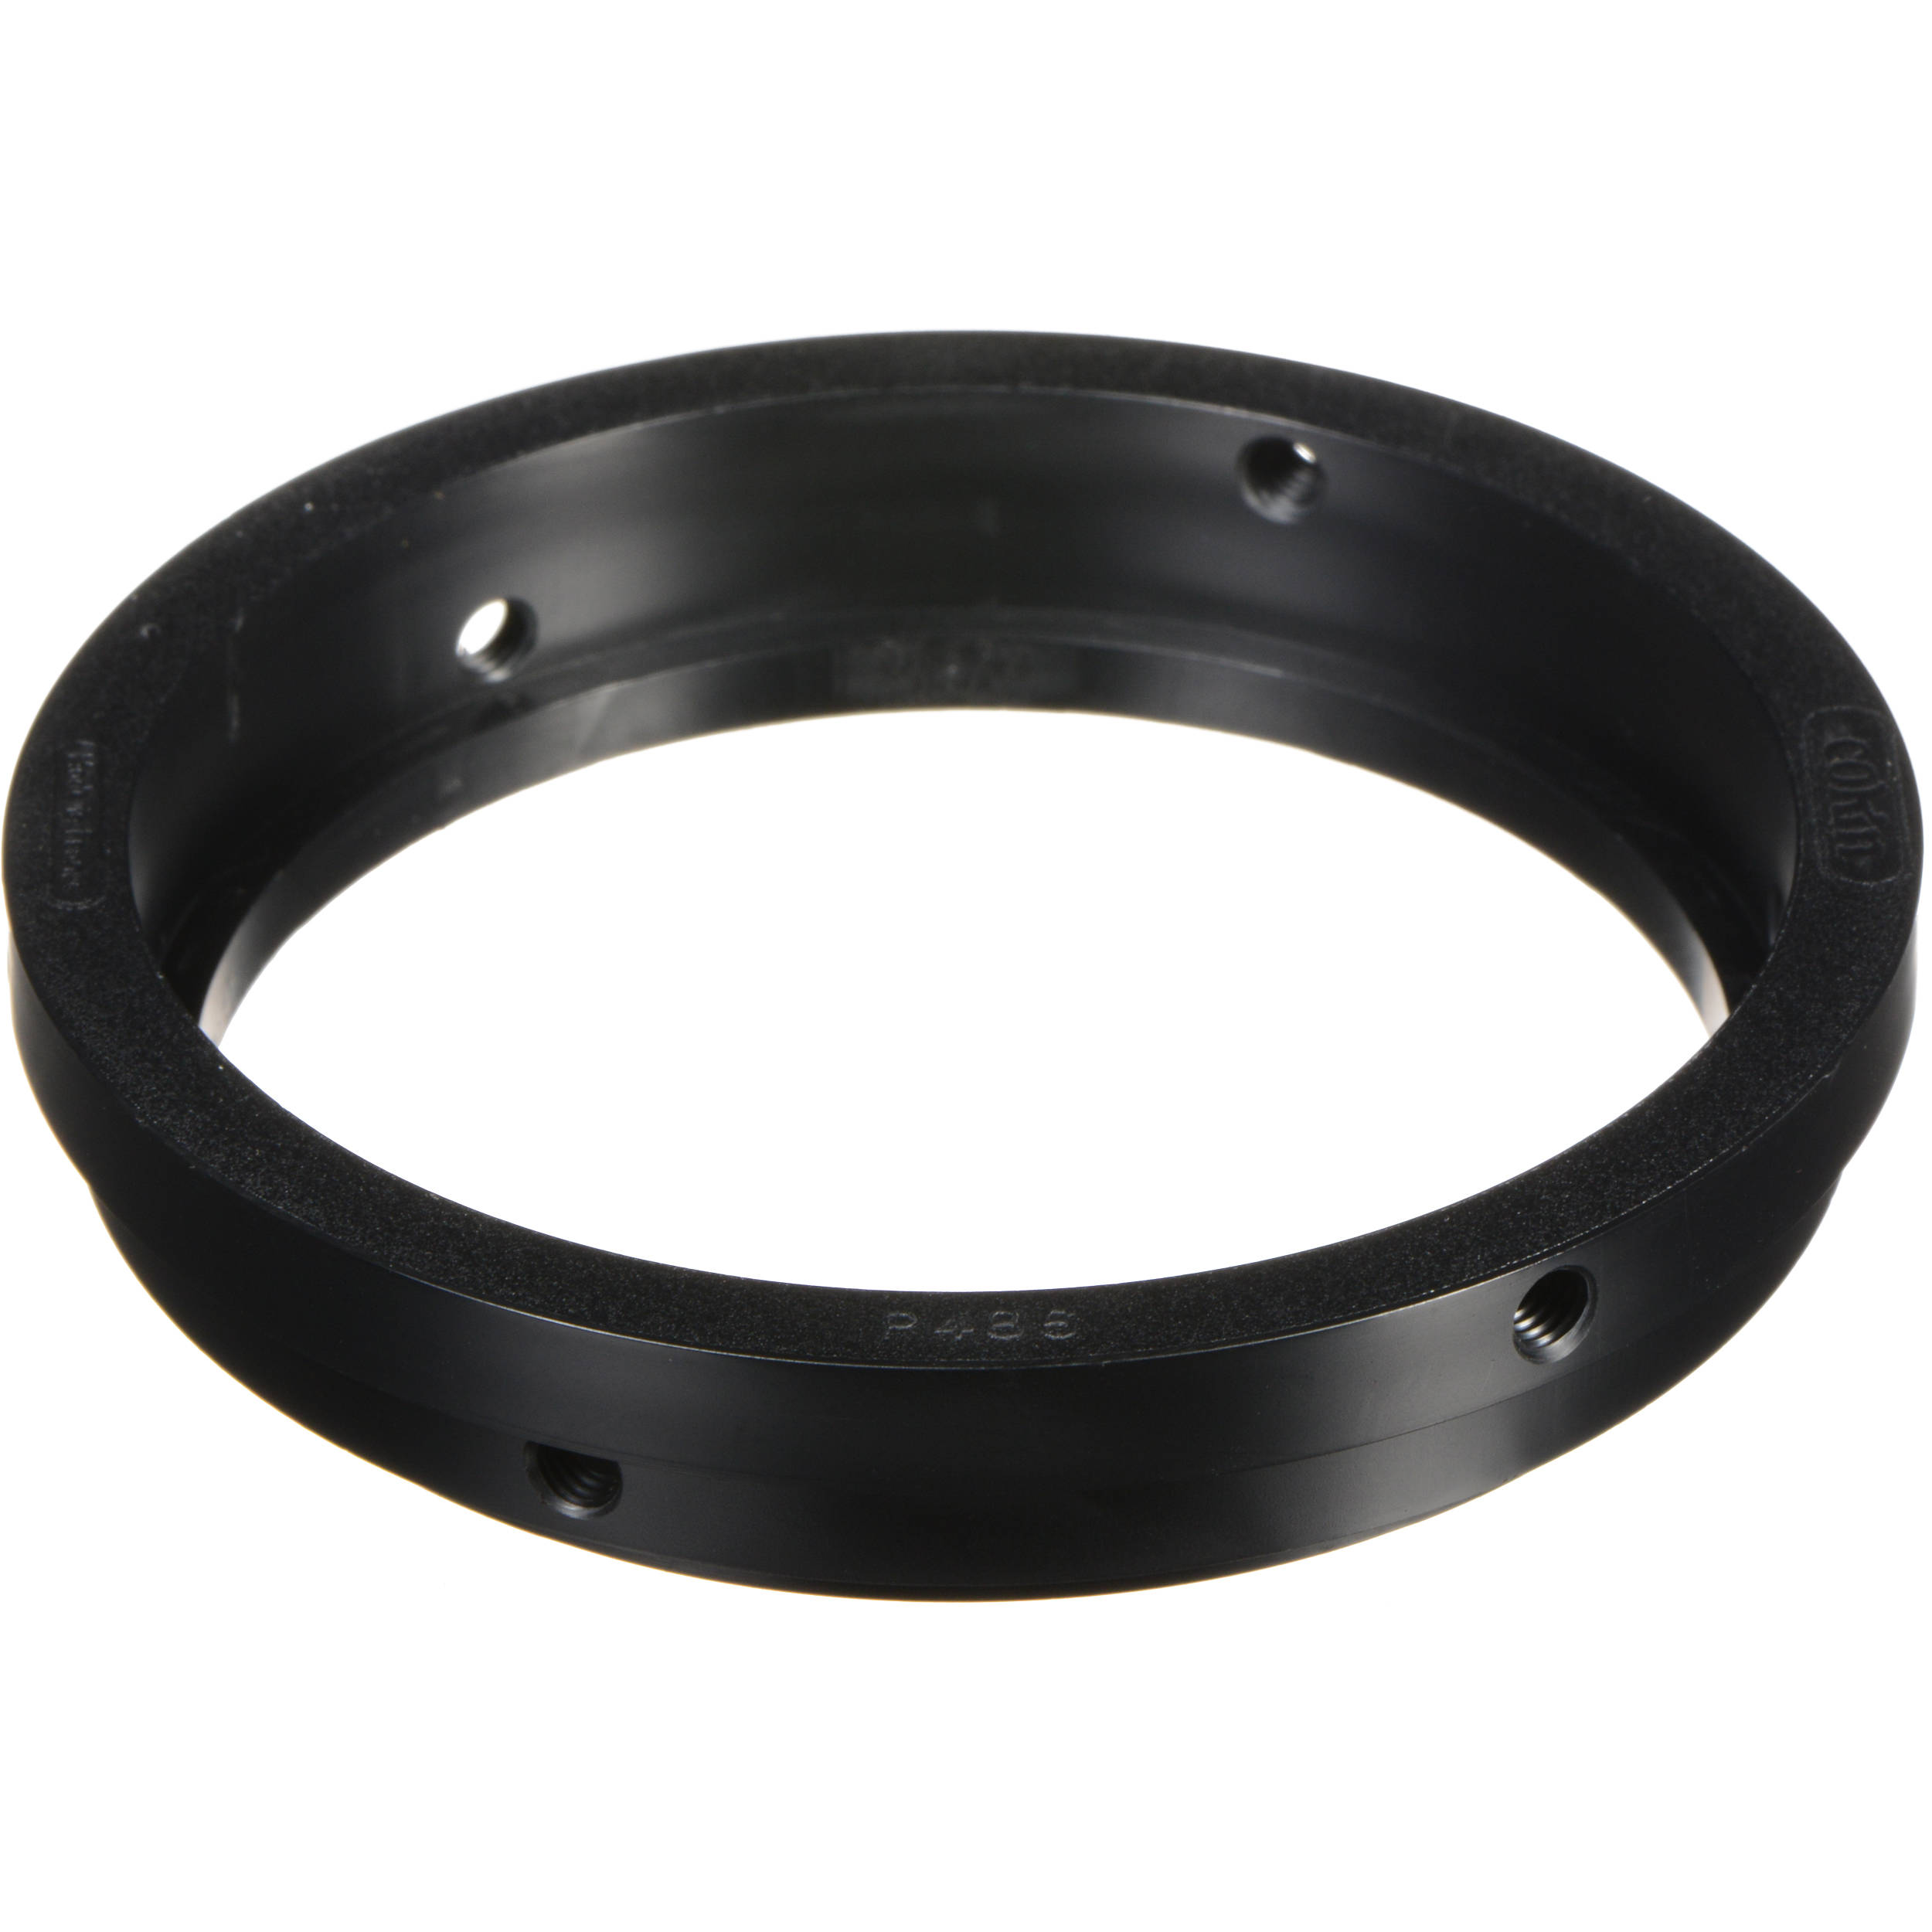 Cokin Universal P Series Filter Holder Adapter Ring Cp499 B H One holds round filters, which can be rotated in the groove. cokin universal p series filter holder adapter ring